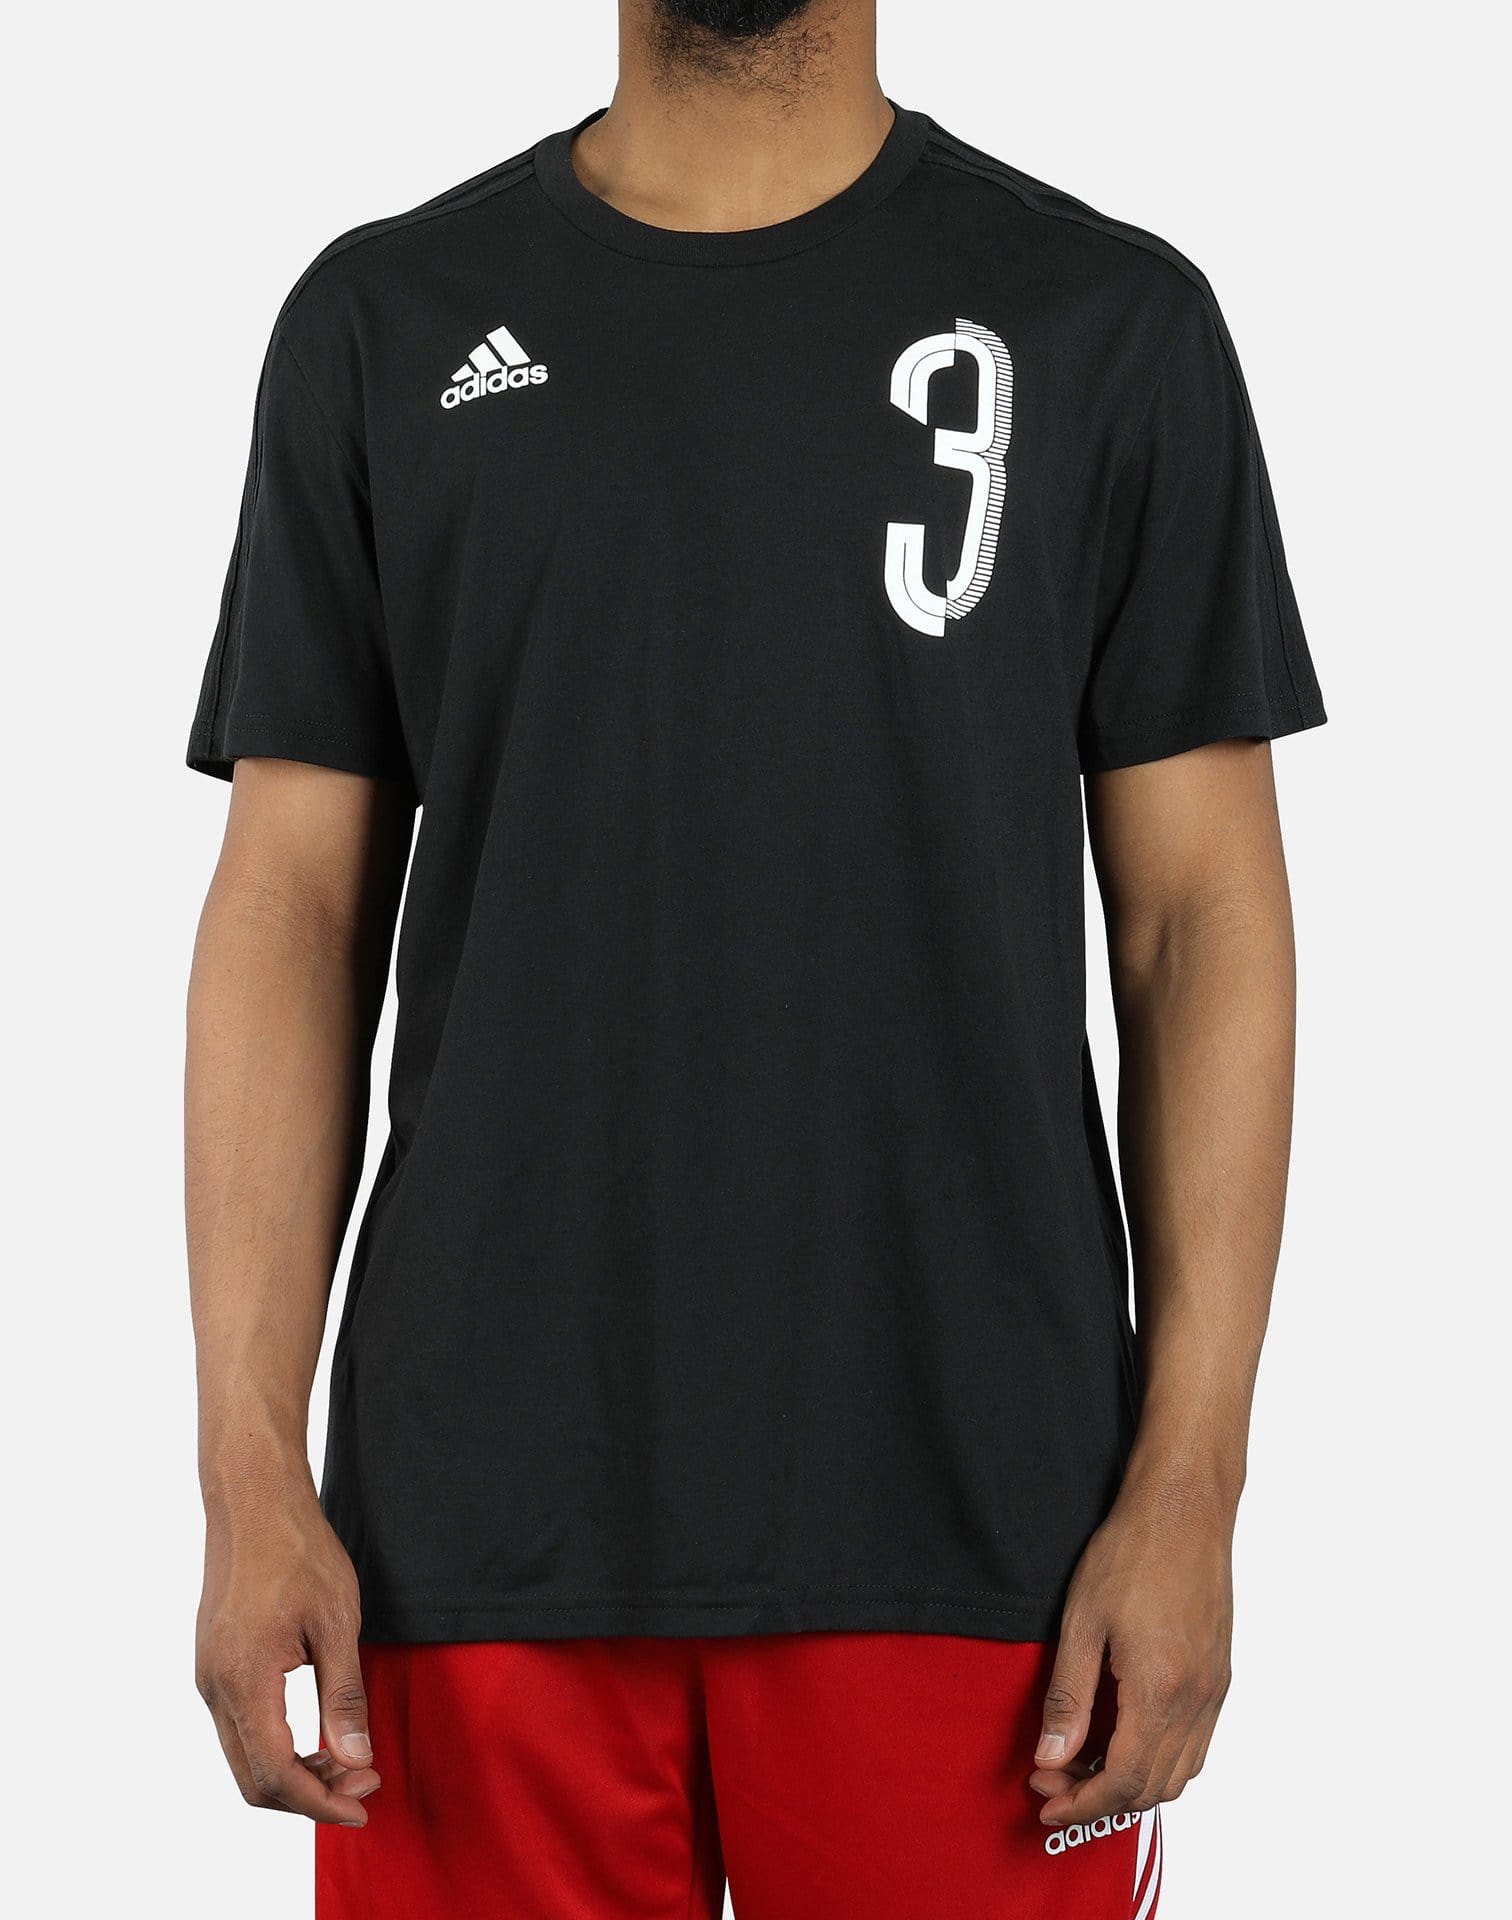 adidas Men's Go To Perf Ult Soccer Tee